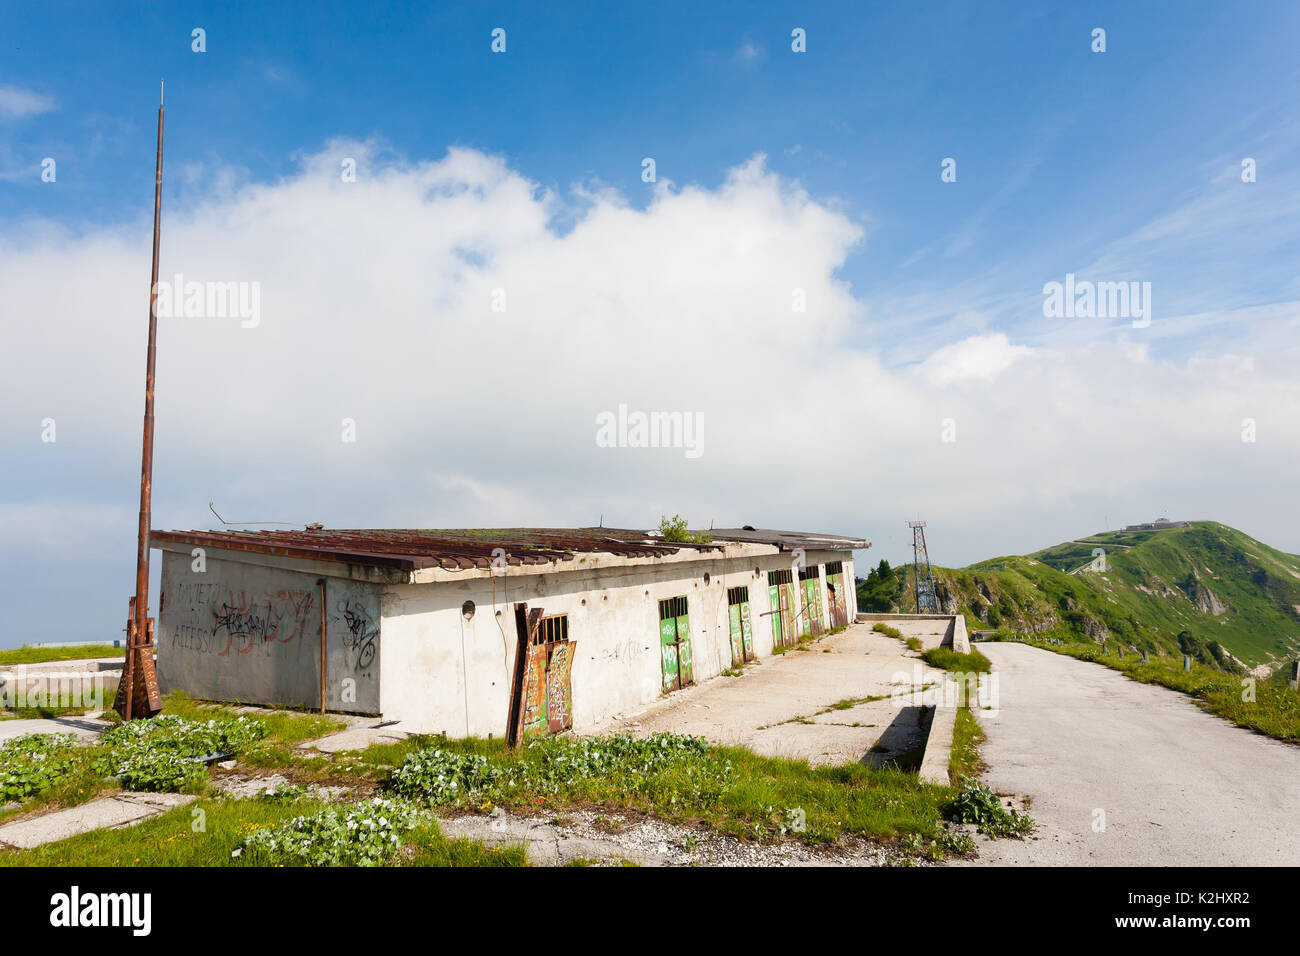 Abandoned military barracks from Monte Grappa,Italy. Stock Photo